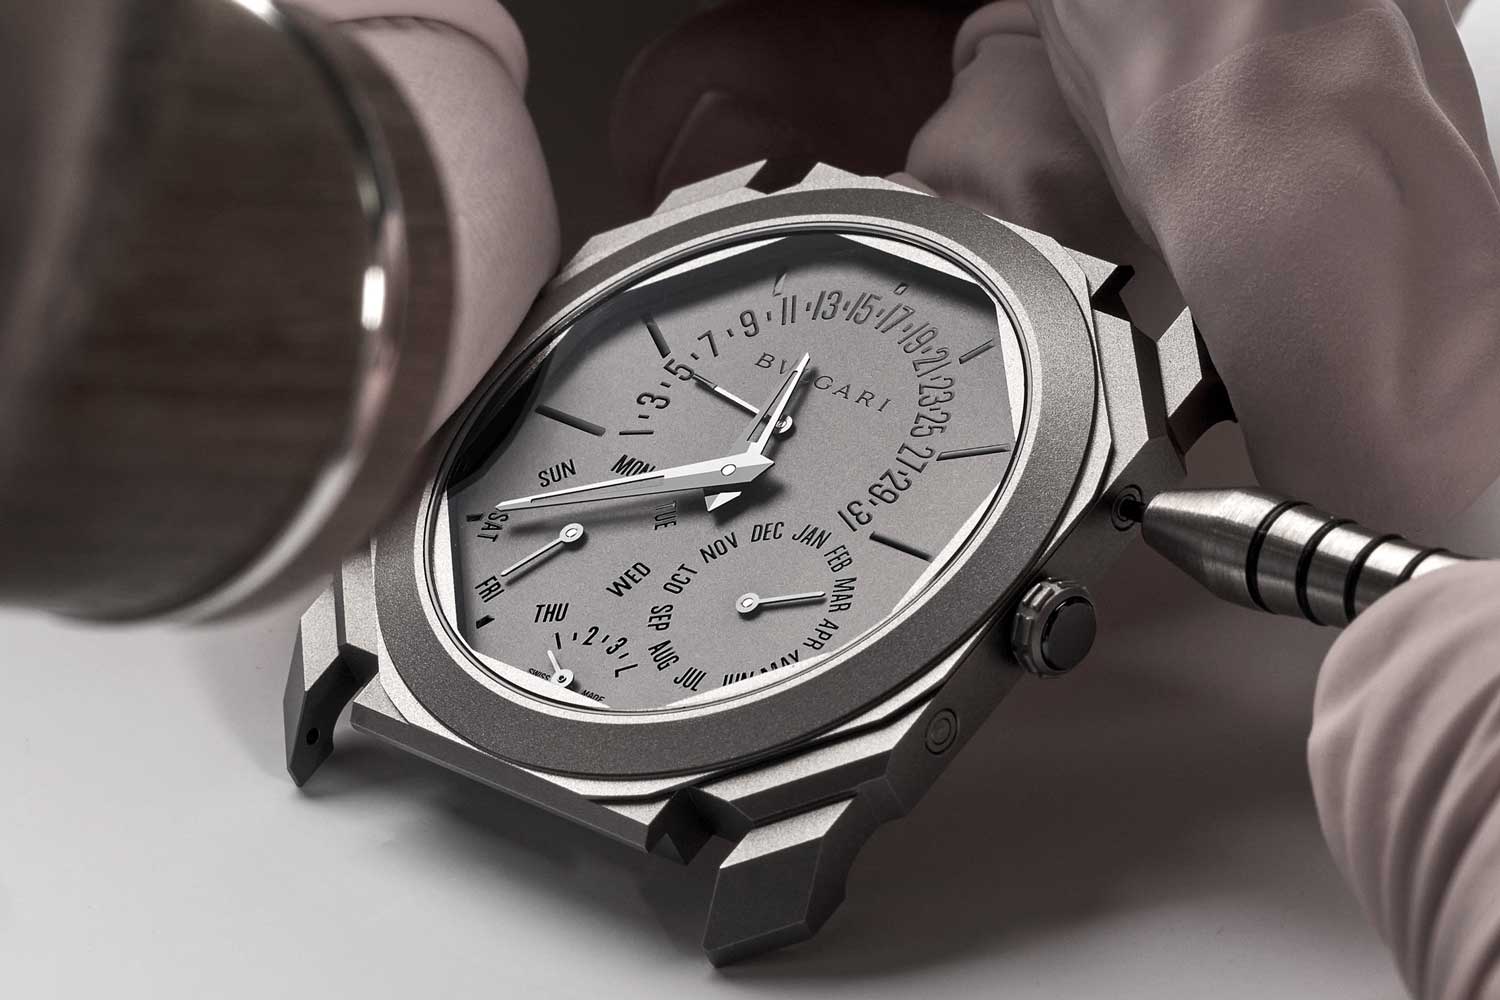 For its first double retrograde perpetual calendar in the Octo Finissimo line, Bvlgari has chosen a design language that is original and fun.